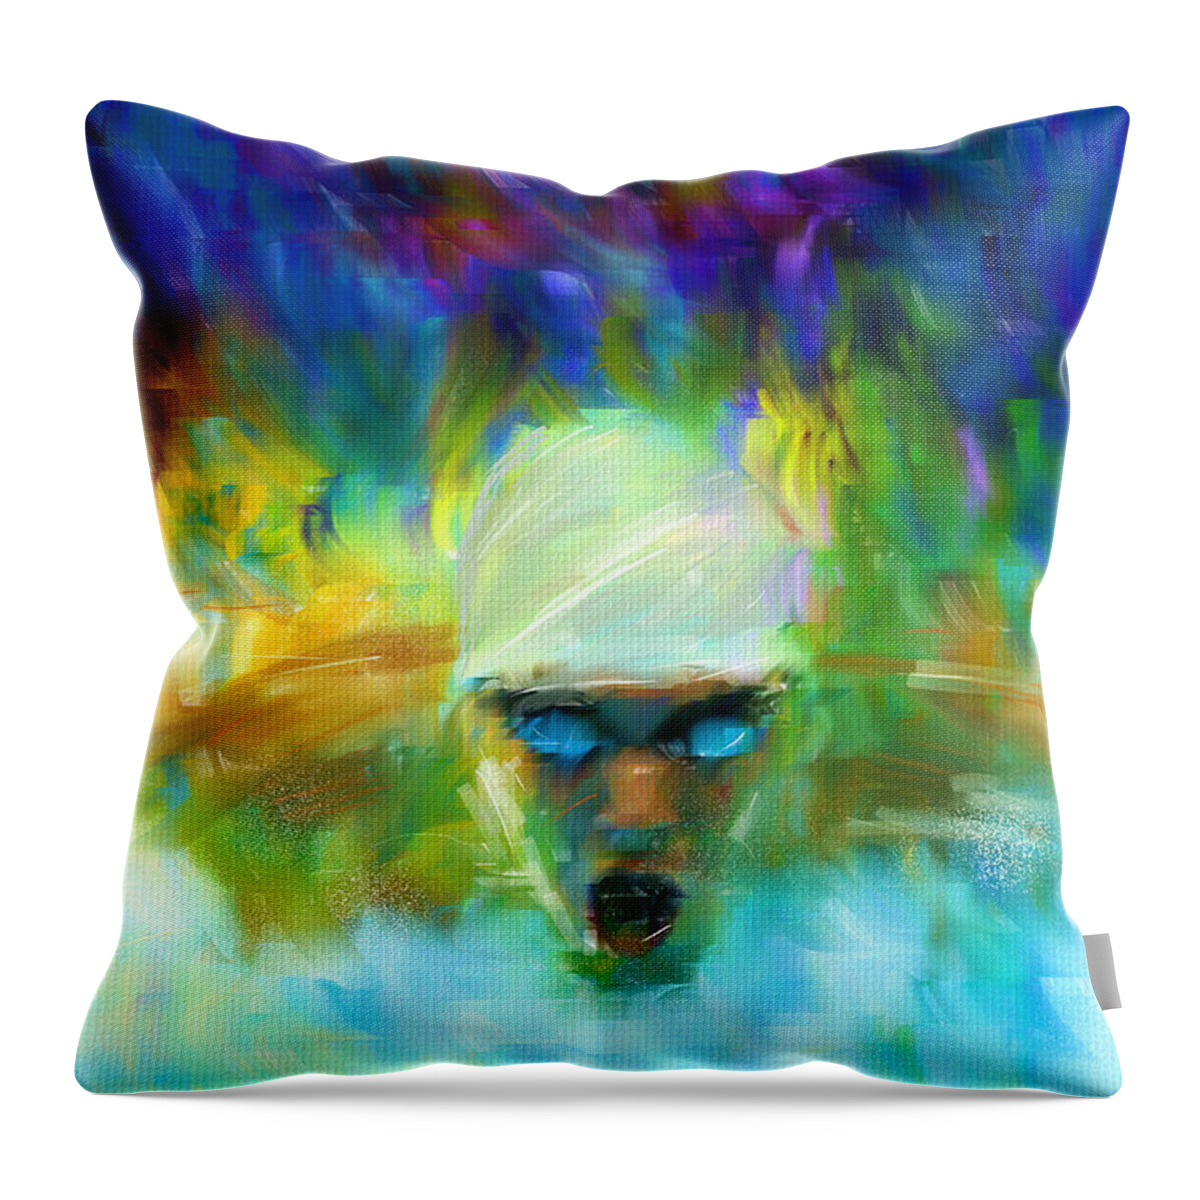 Swimming Throw Pillow featuring the digital art Wet And Wild by Lourry Legarde